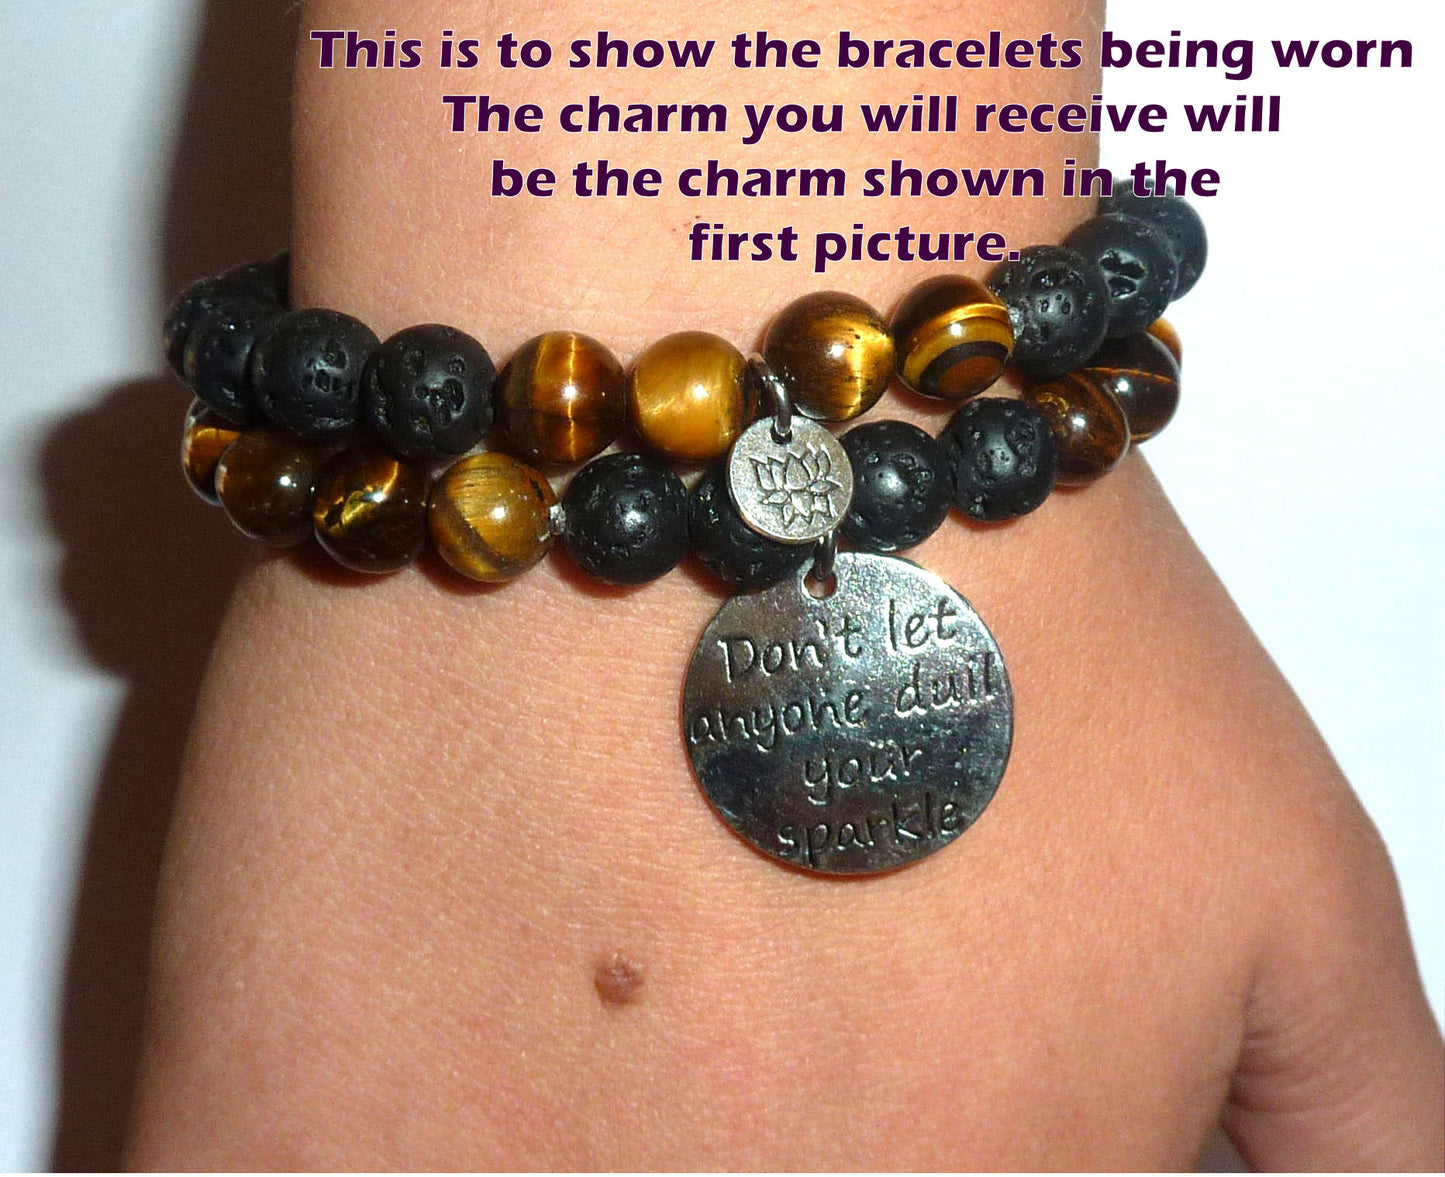 A Piece Of My Heart Is In Heaven - Women's Tiger Eye & Black Lava Diffuser Yoga Beads Charm Stretch Bracelet Gift Set